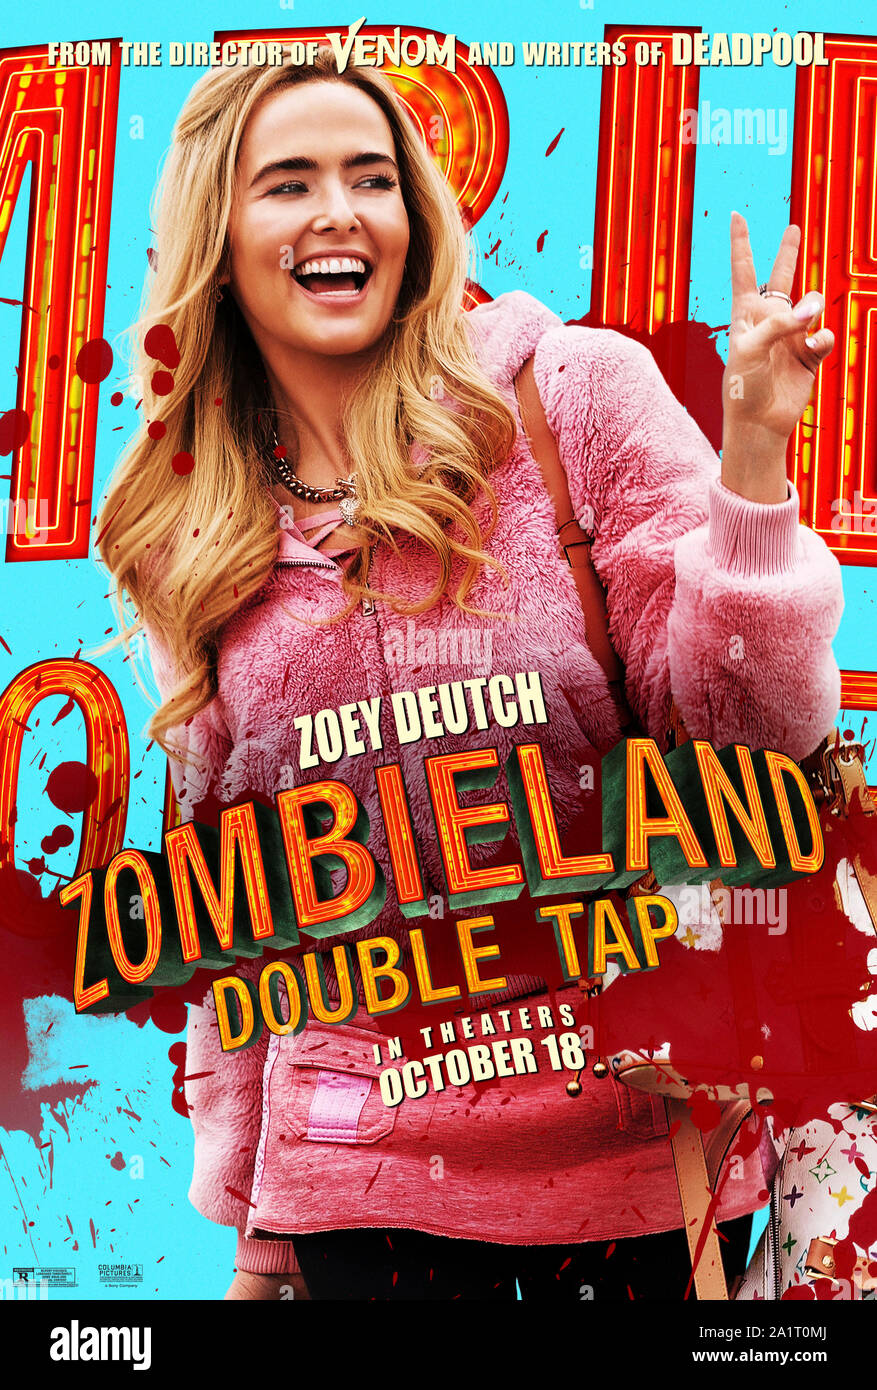 RELEASE DATE: October 18, 2019 TITLE: Zombieland 2: Double Tap STUDIO: Colombia Pictures DIRECTOR: Ruben Fleischer PLOT: Columbus, Tallahasse, Wichita, and Little Rock move to the American heartland as they face off against evolved zombies, fellow survivors, and the growing pains of the snarky makeshift family. STARRING: ZOEY DEUTCH as Madison. (Credit Image: © Colombia Pictures/Entertainment Pictures) Stock Photo